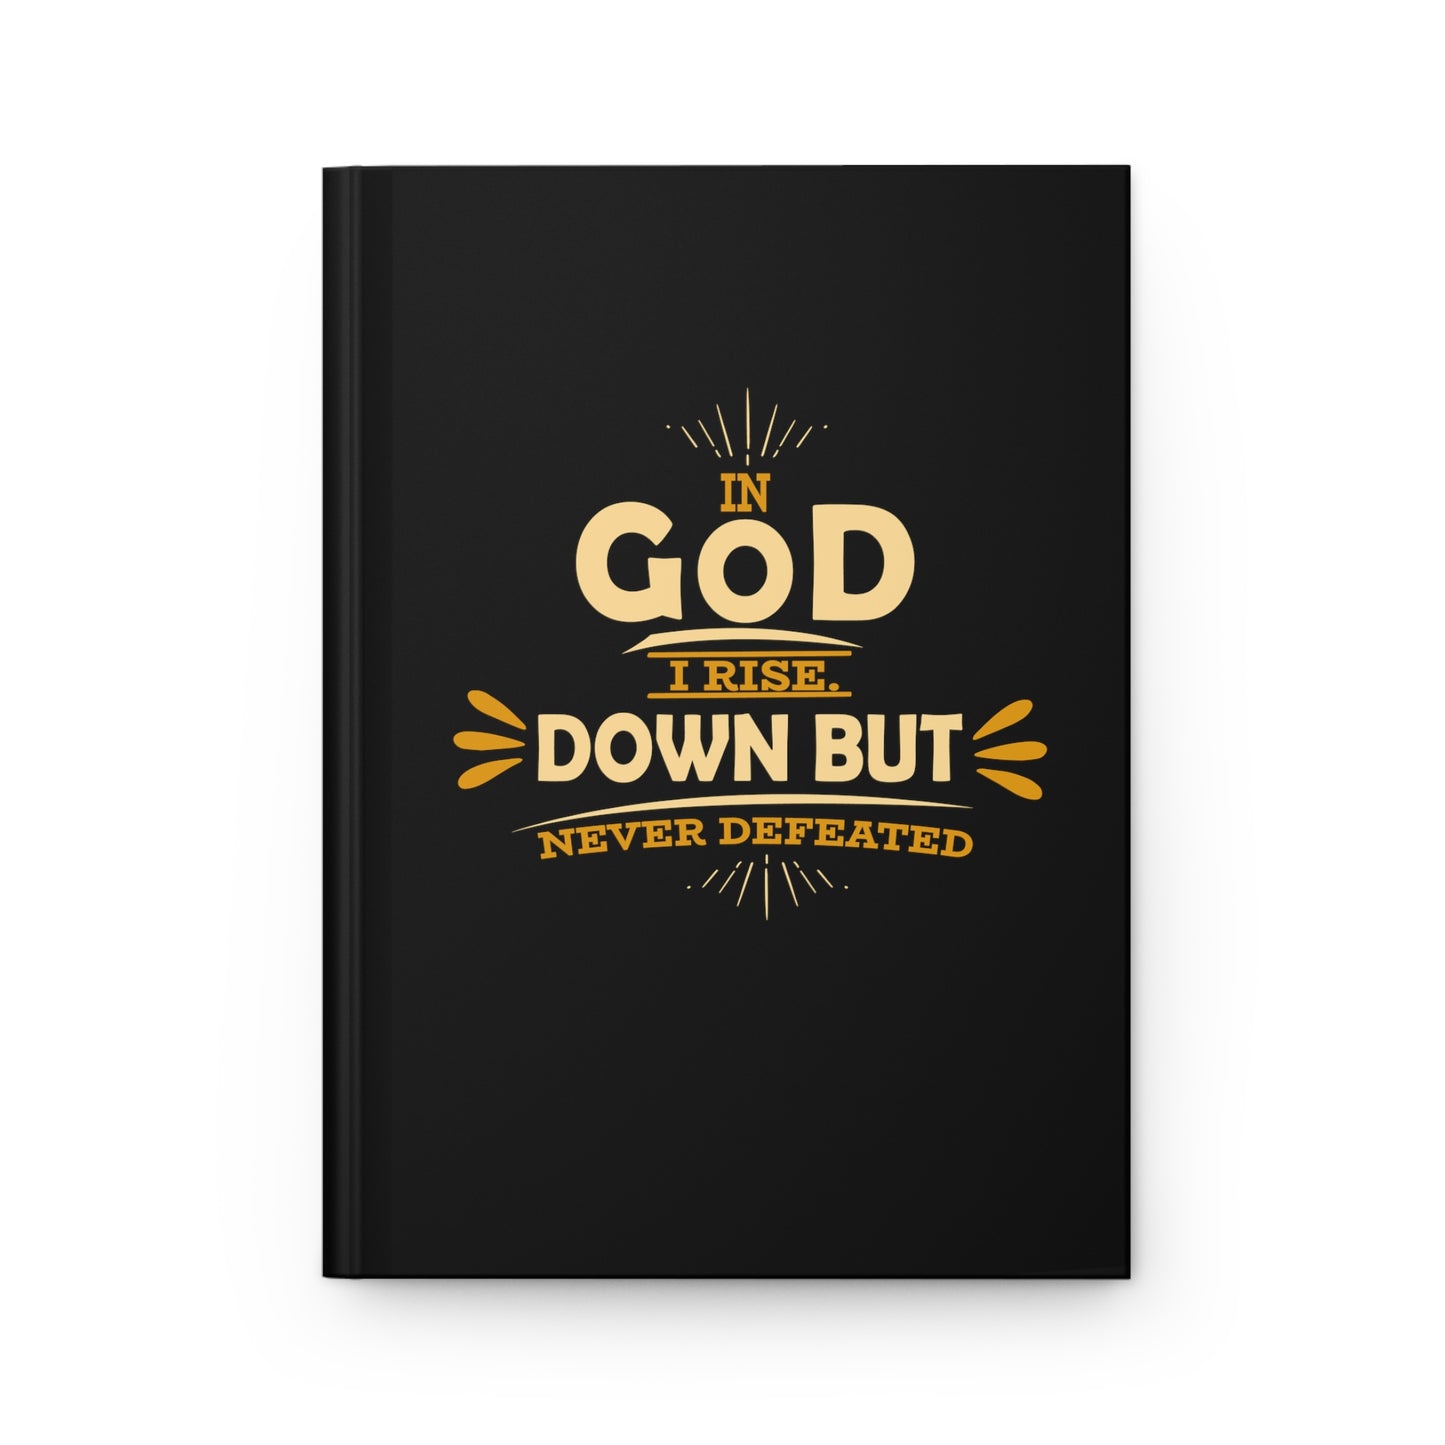 In God I Rise Down But Never Defeated Hardcover Journal Matte